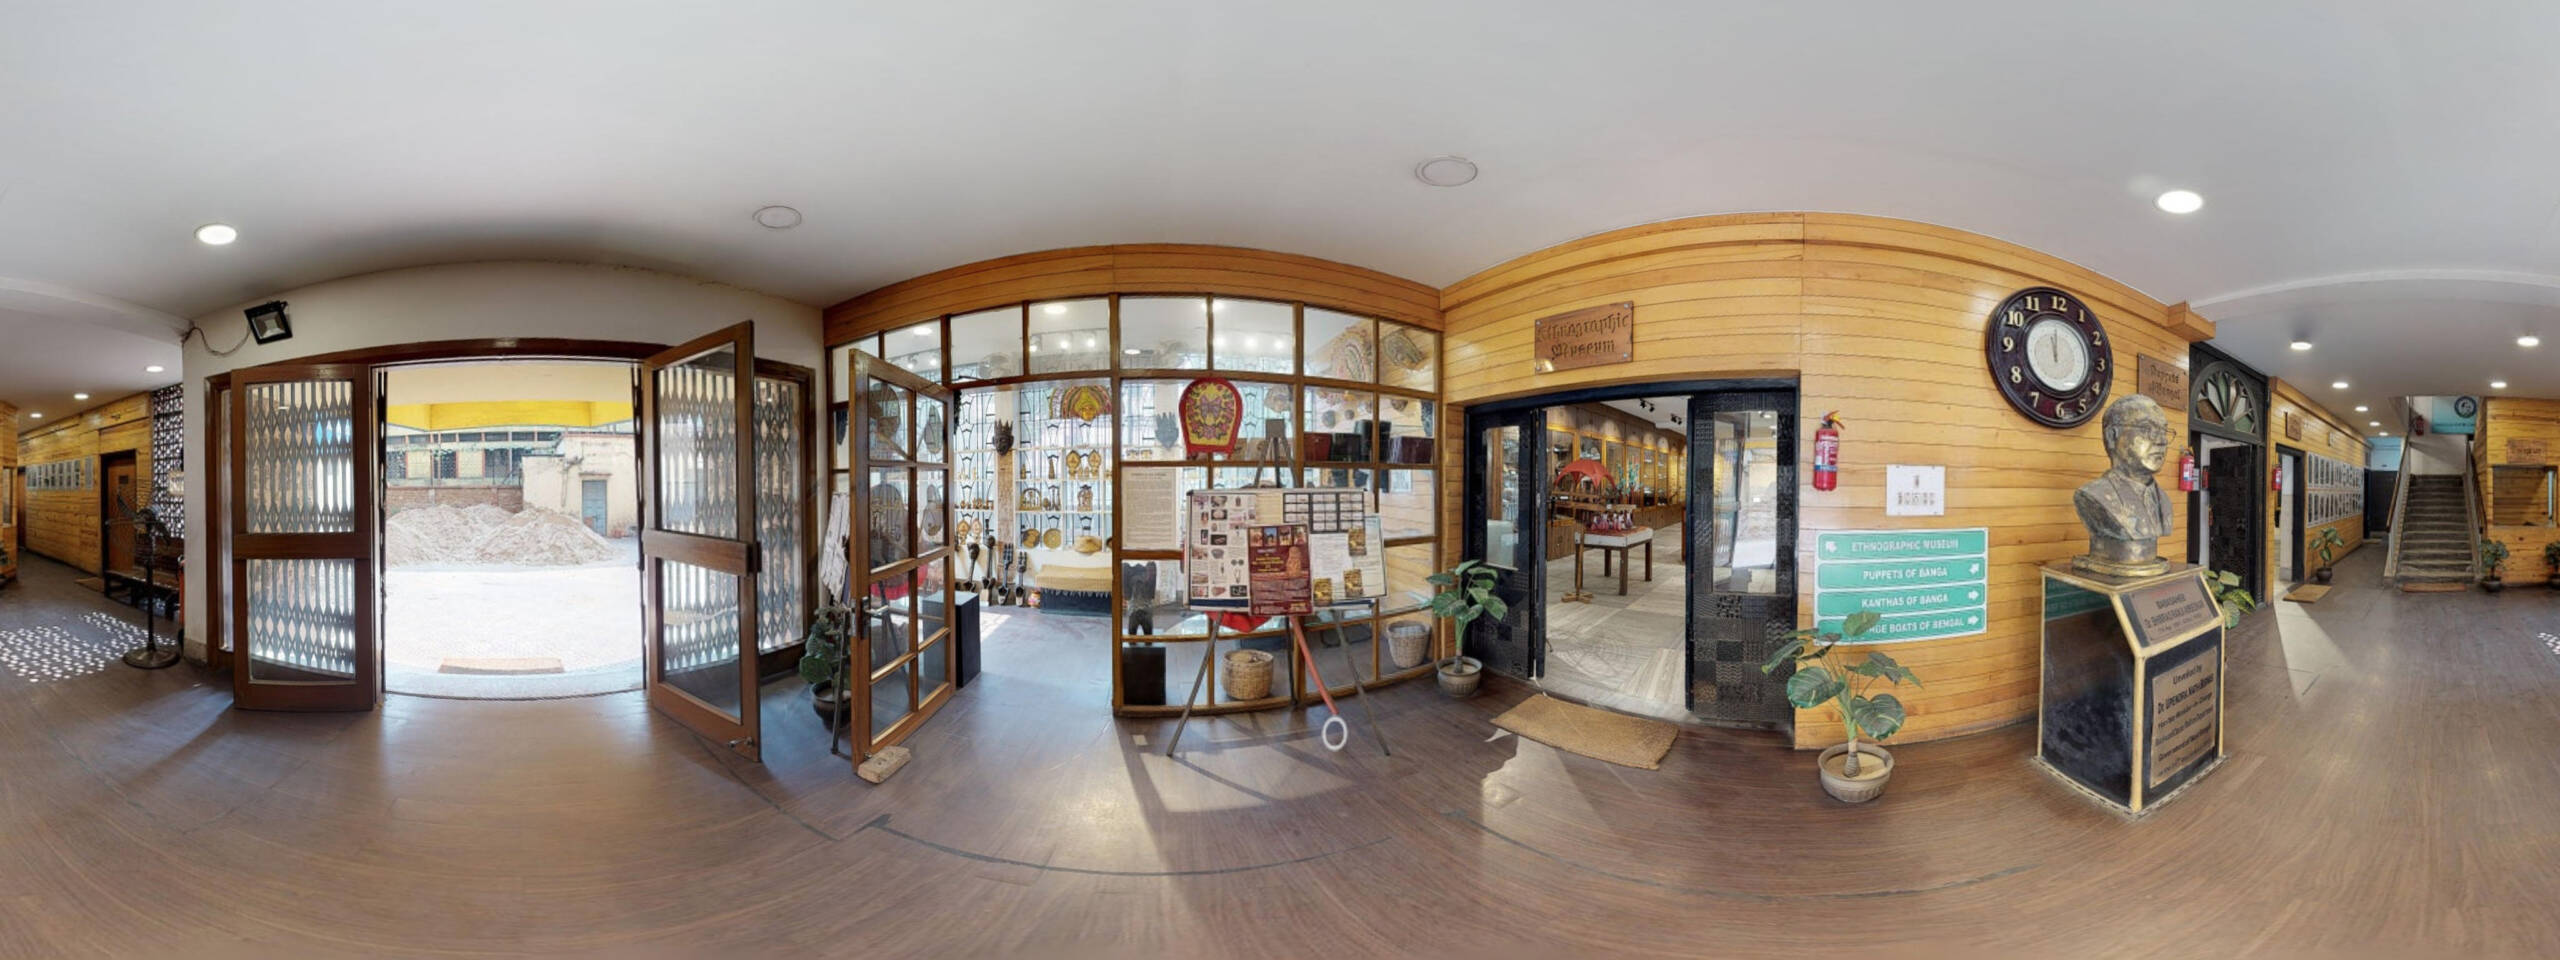 360 degree view of entrance of CRI Museum